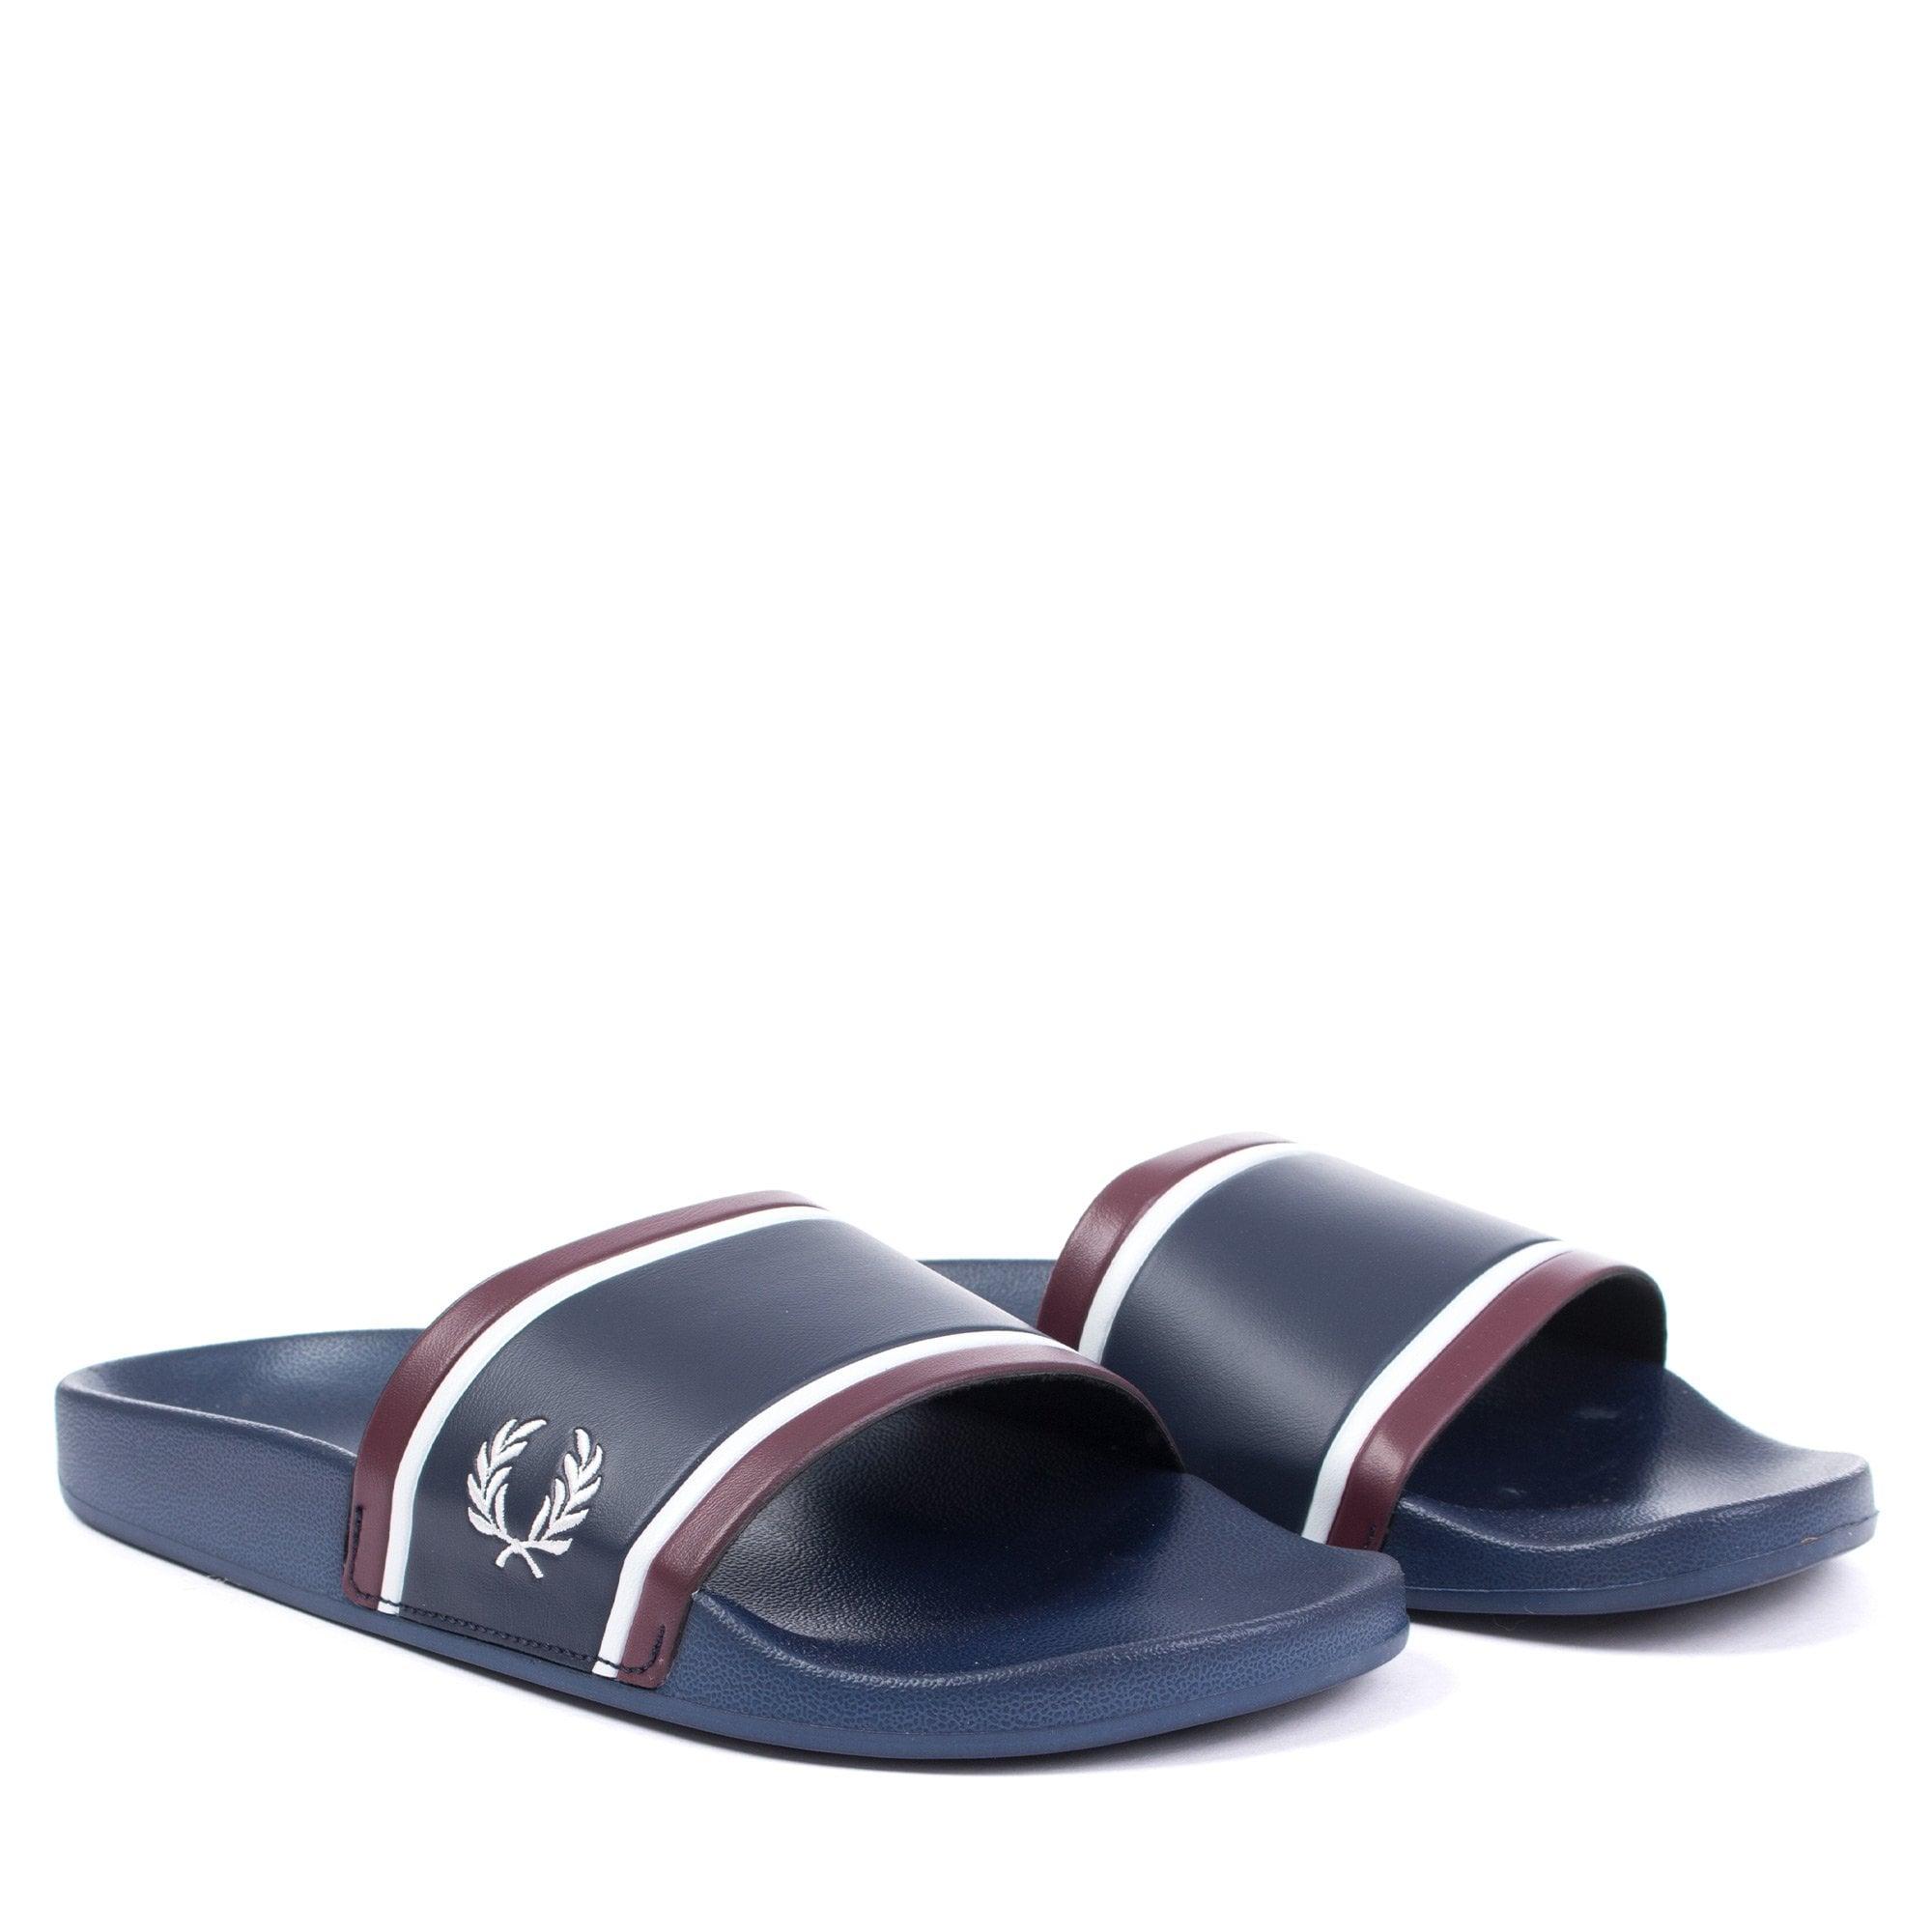 Fred Perry Rubber Printed Sliders in Blue for Men - Lyst